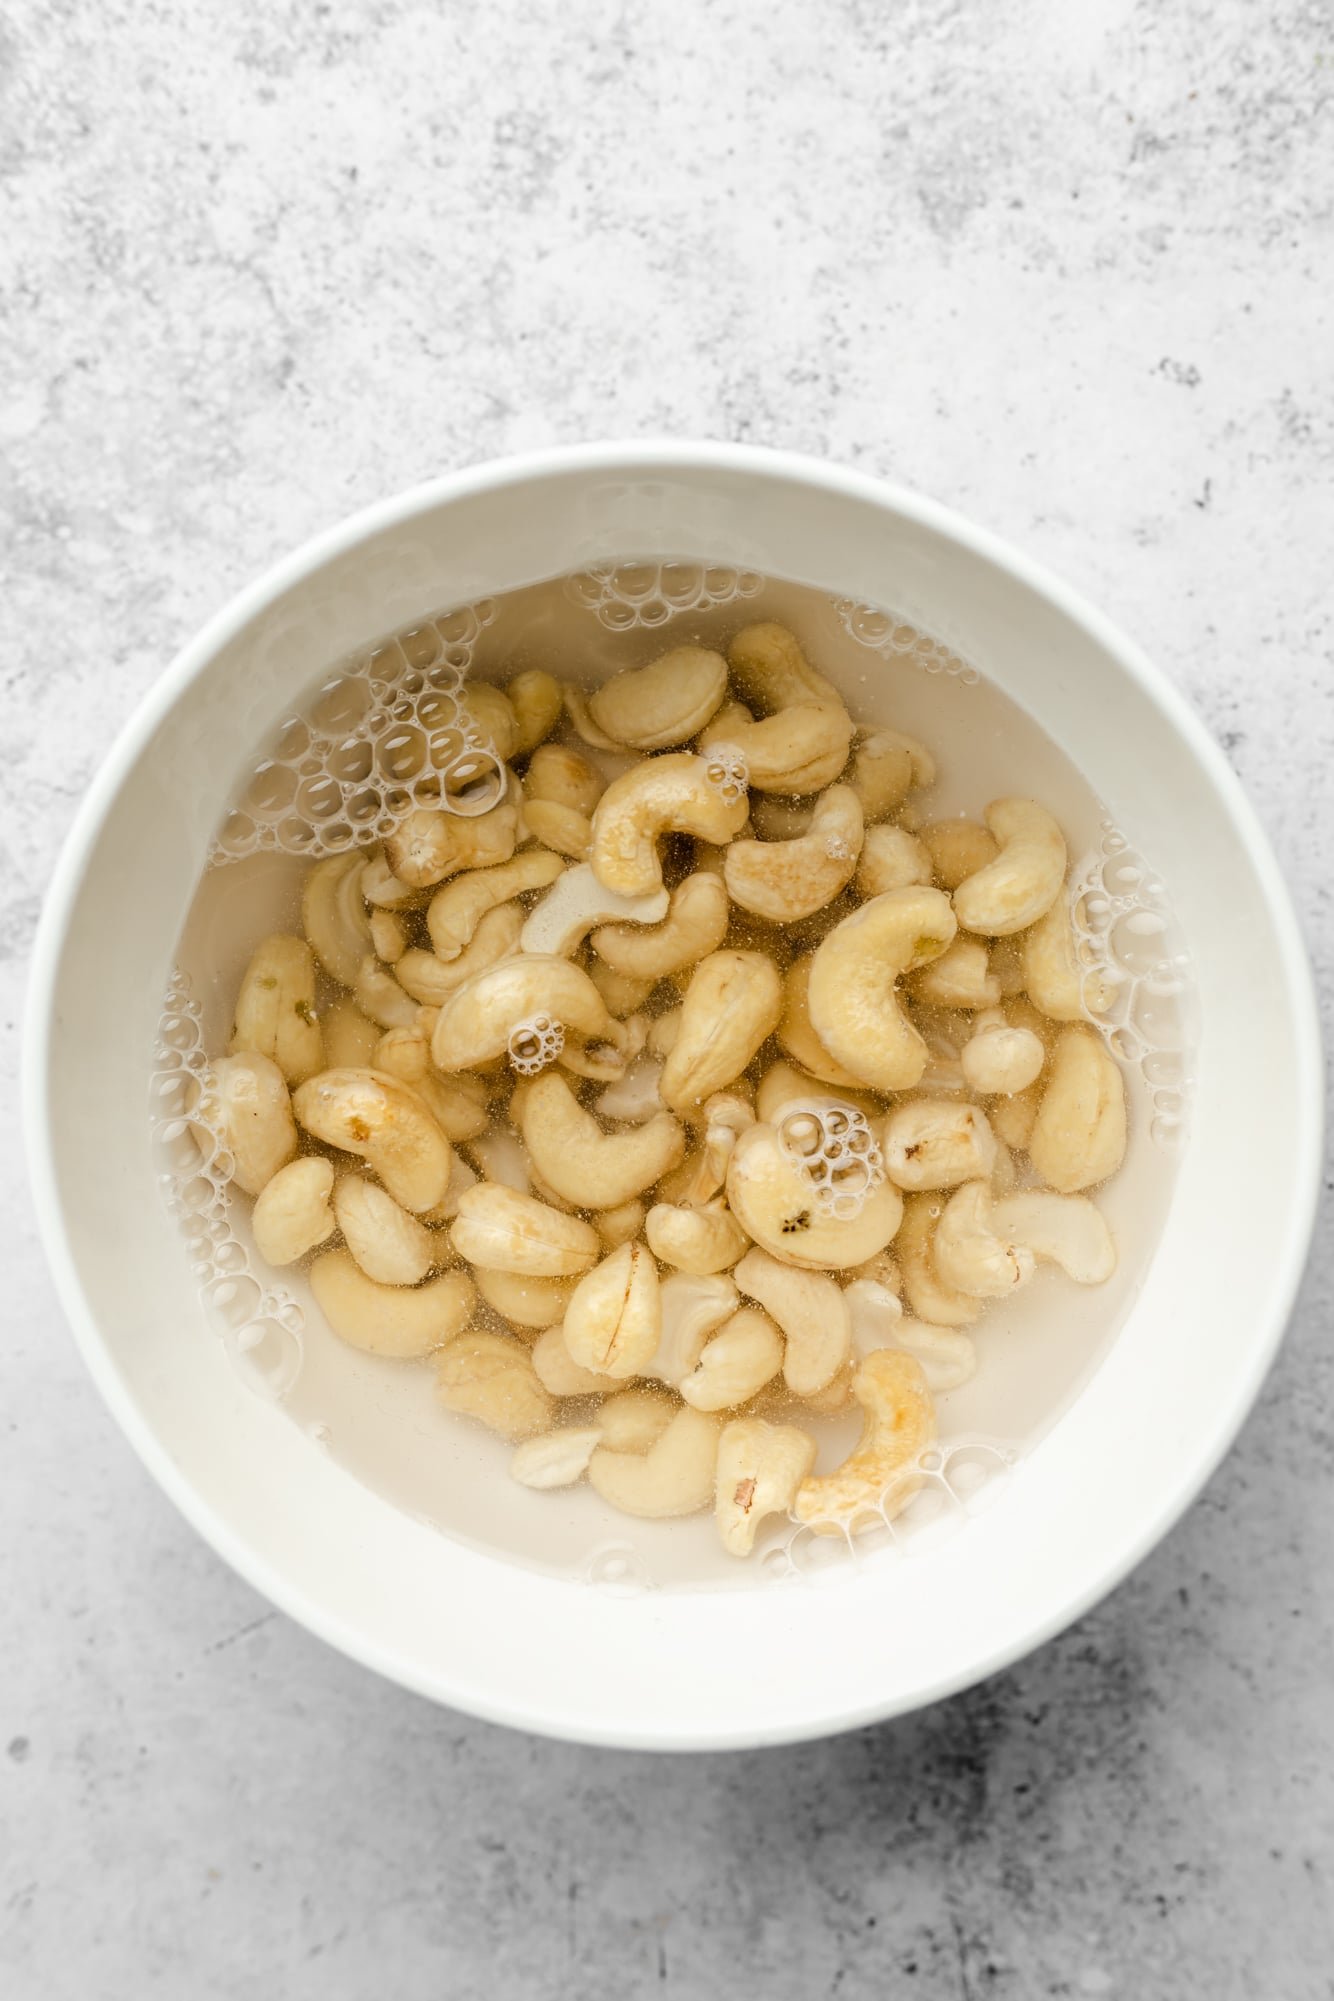 Cashews soaked in water in a bowl.